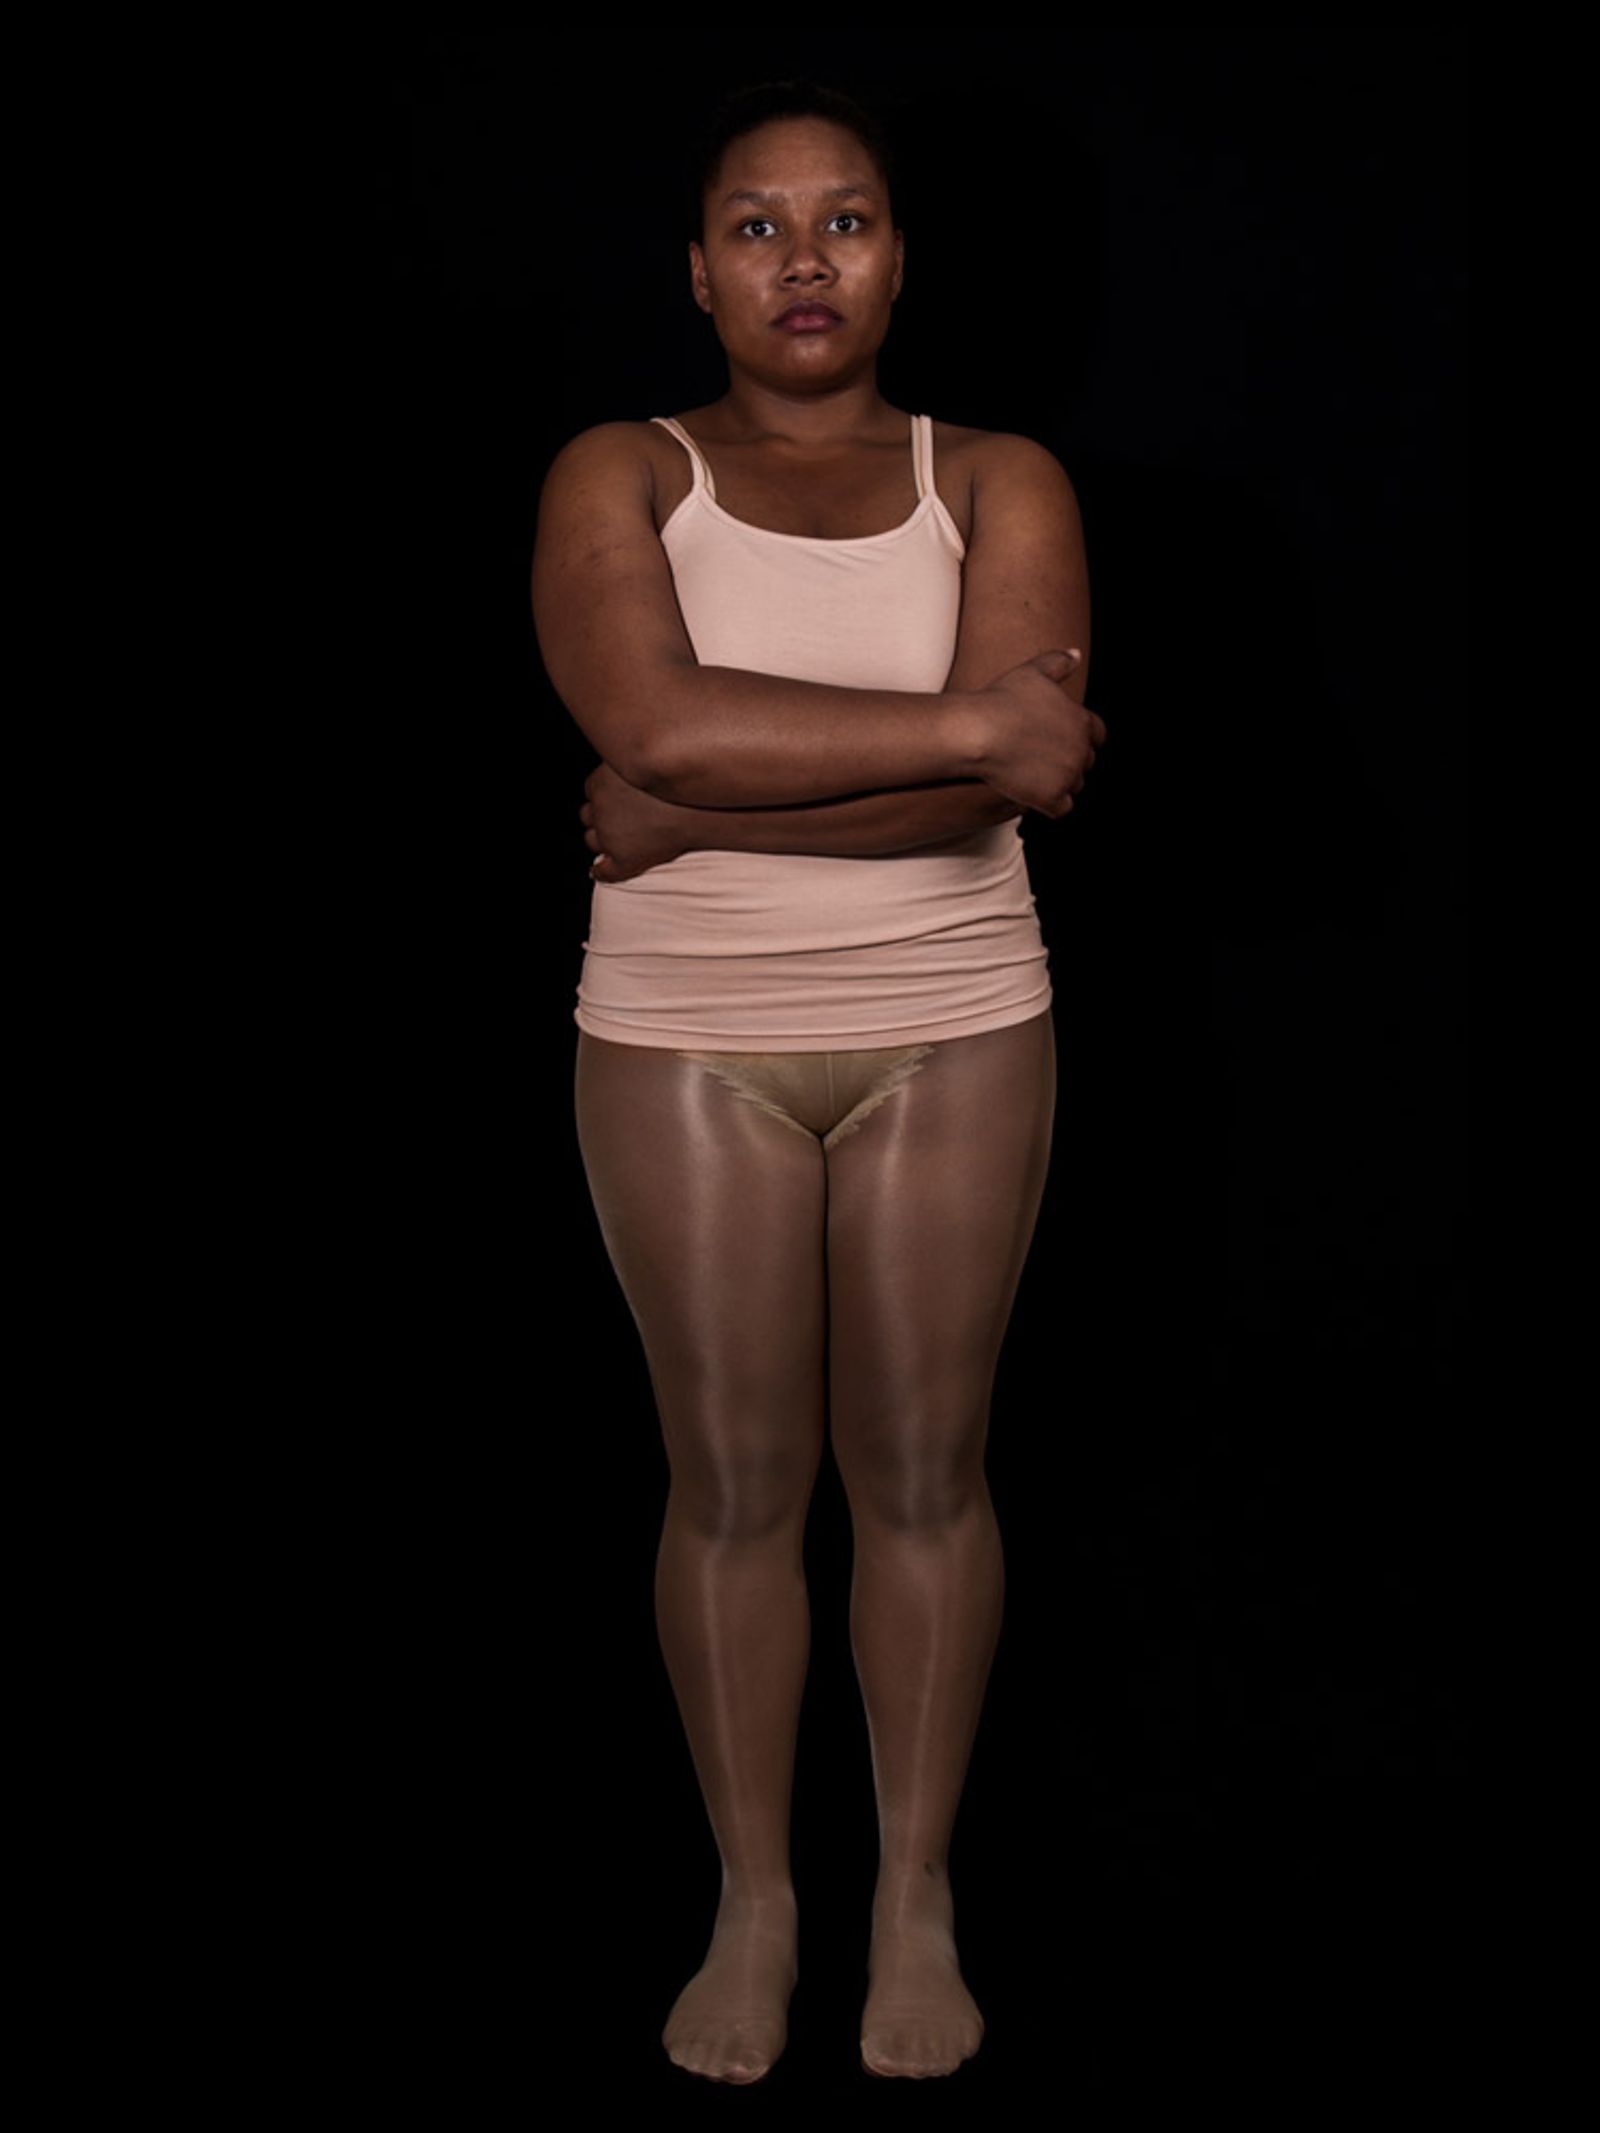 © Henrietta Soininen - Image from the Skin color (Color piel) photography project